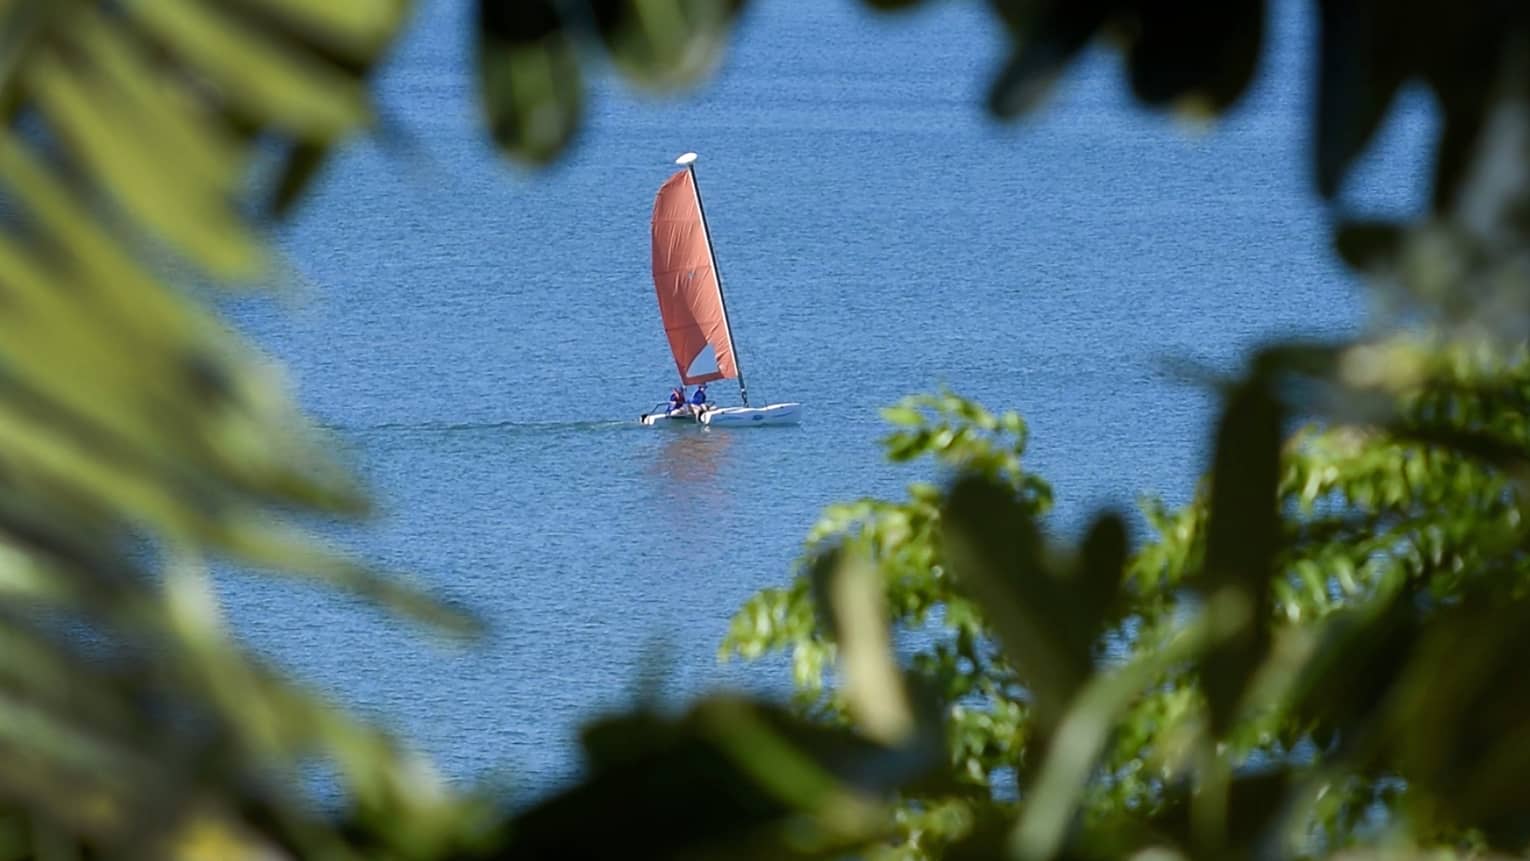 A sailboat on the ocean spotted through a tree 